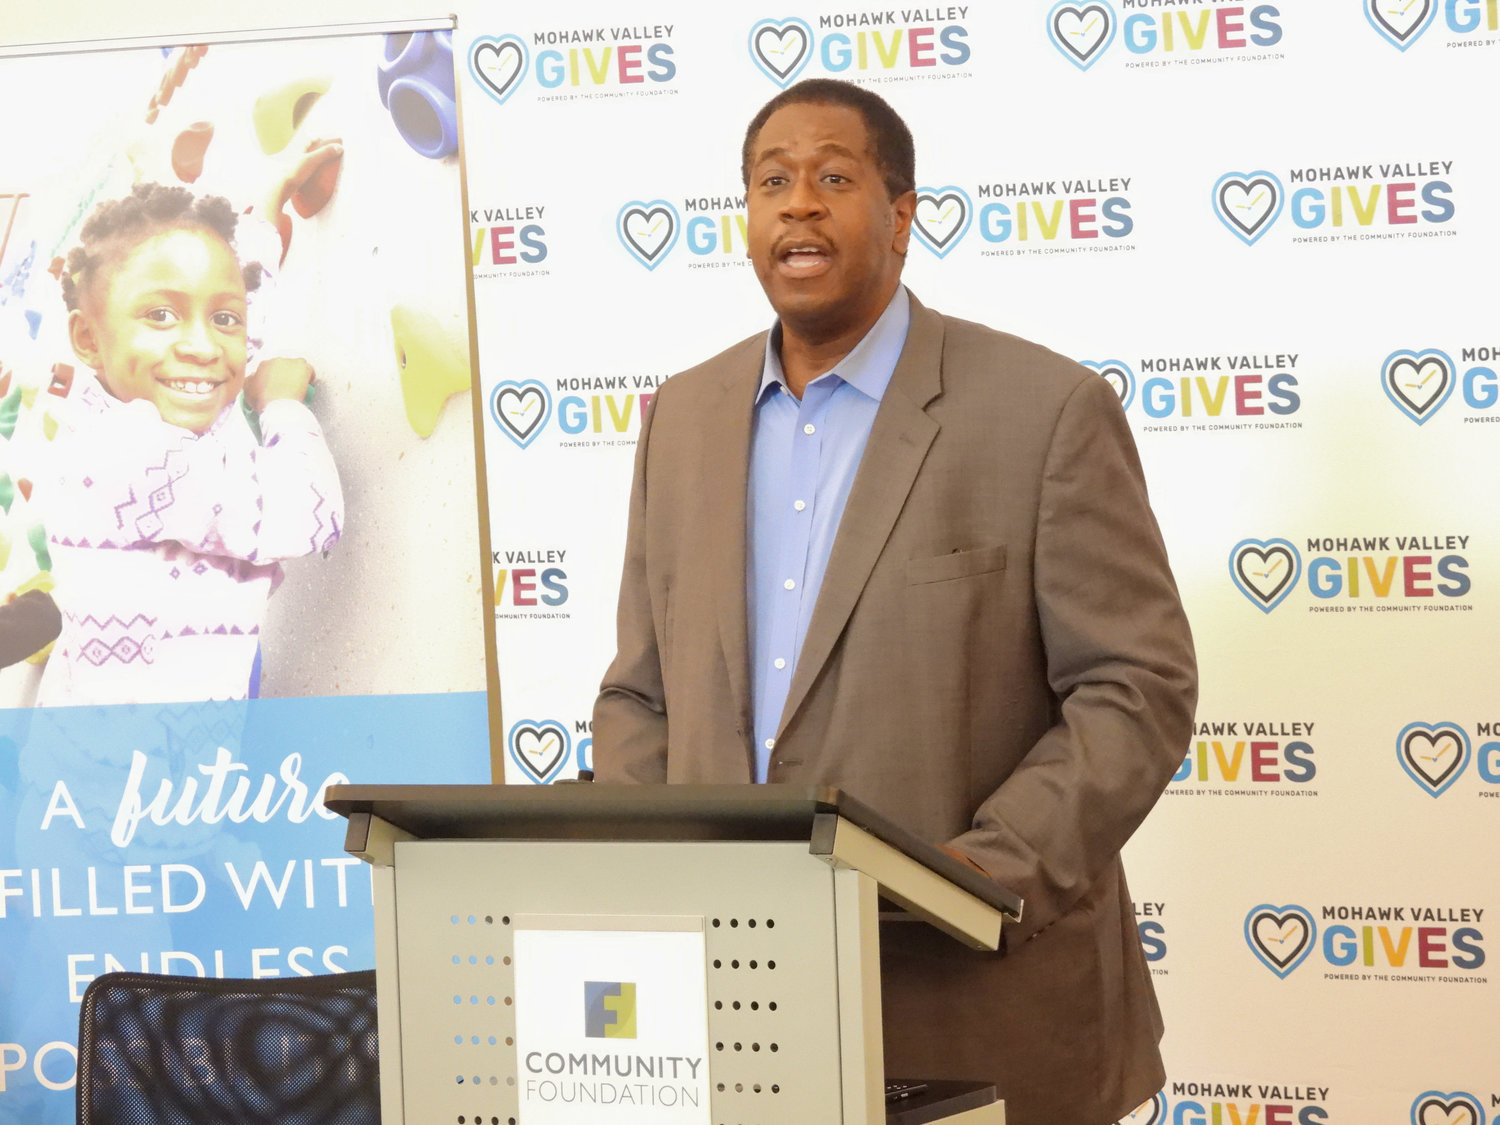 24 HOUR GIVING — Jawwaad Rasheed, chair of the Community Foundation board, speaks on the new initiative by Community Foundation and its first ever first-ever 24-hour day of giving at a press conference on Wednesday.